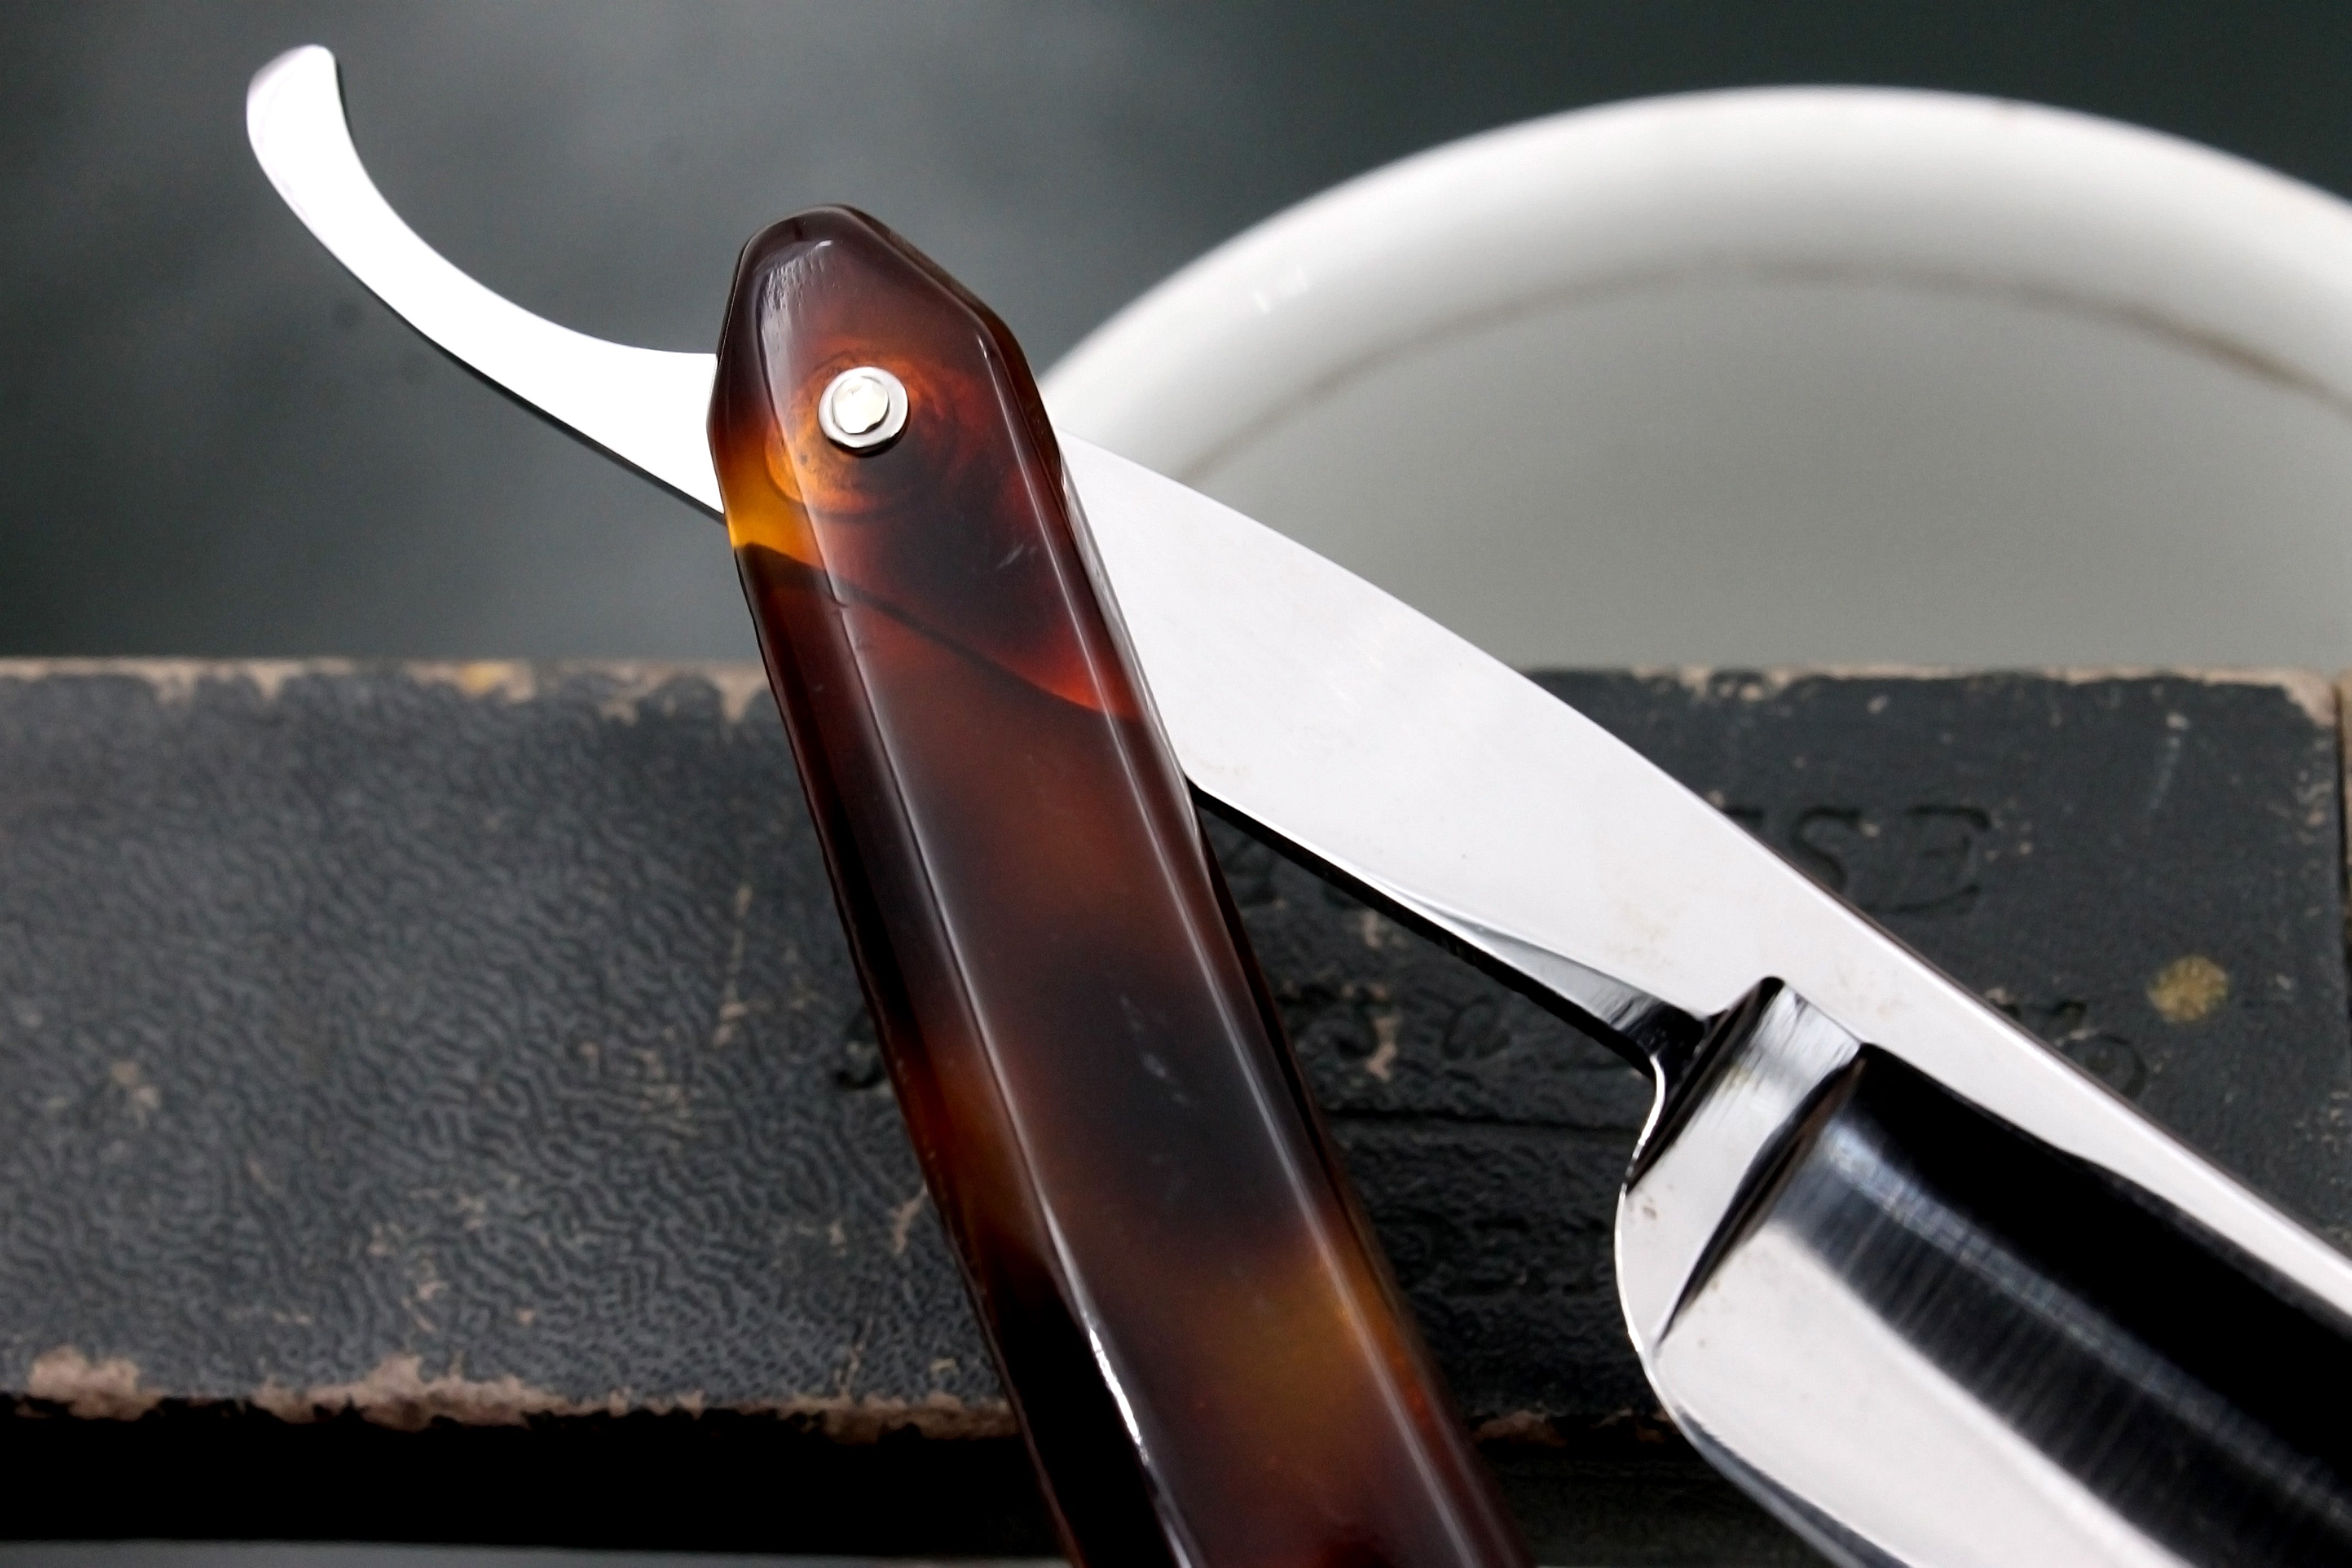 Thiers Issard "Tenax" Sheep & Wolf Full Hollow Etched- 11/16 French Straight Razor - Shave Ready